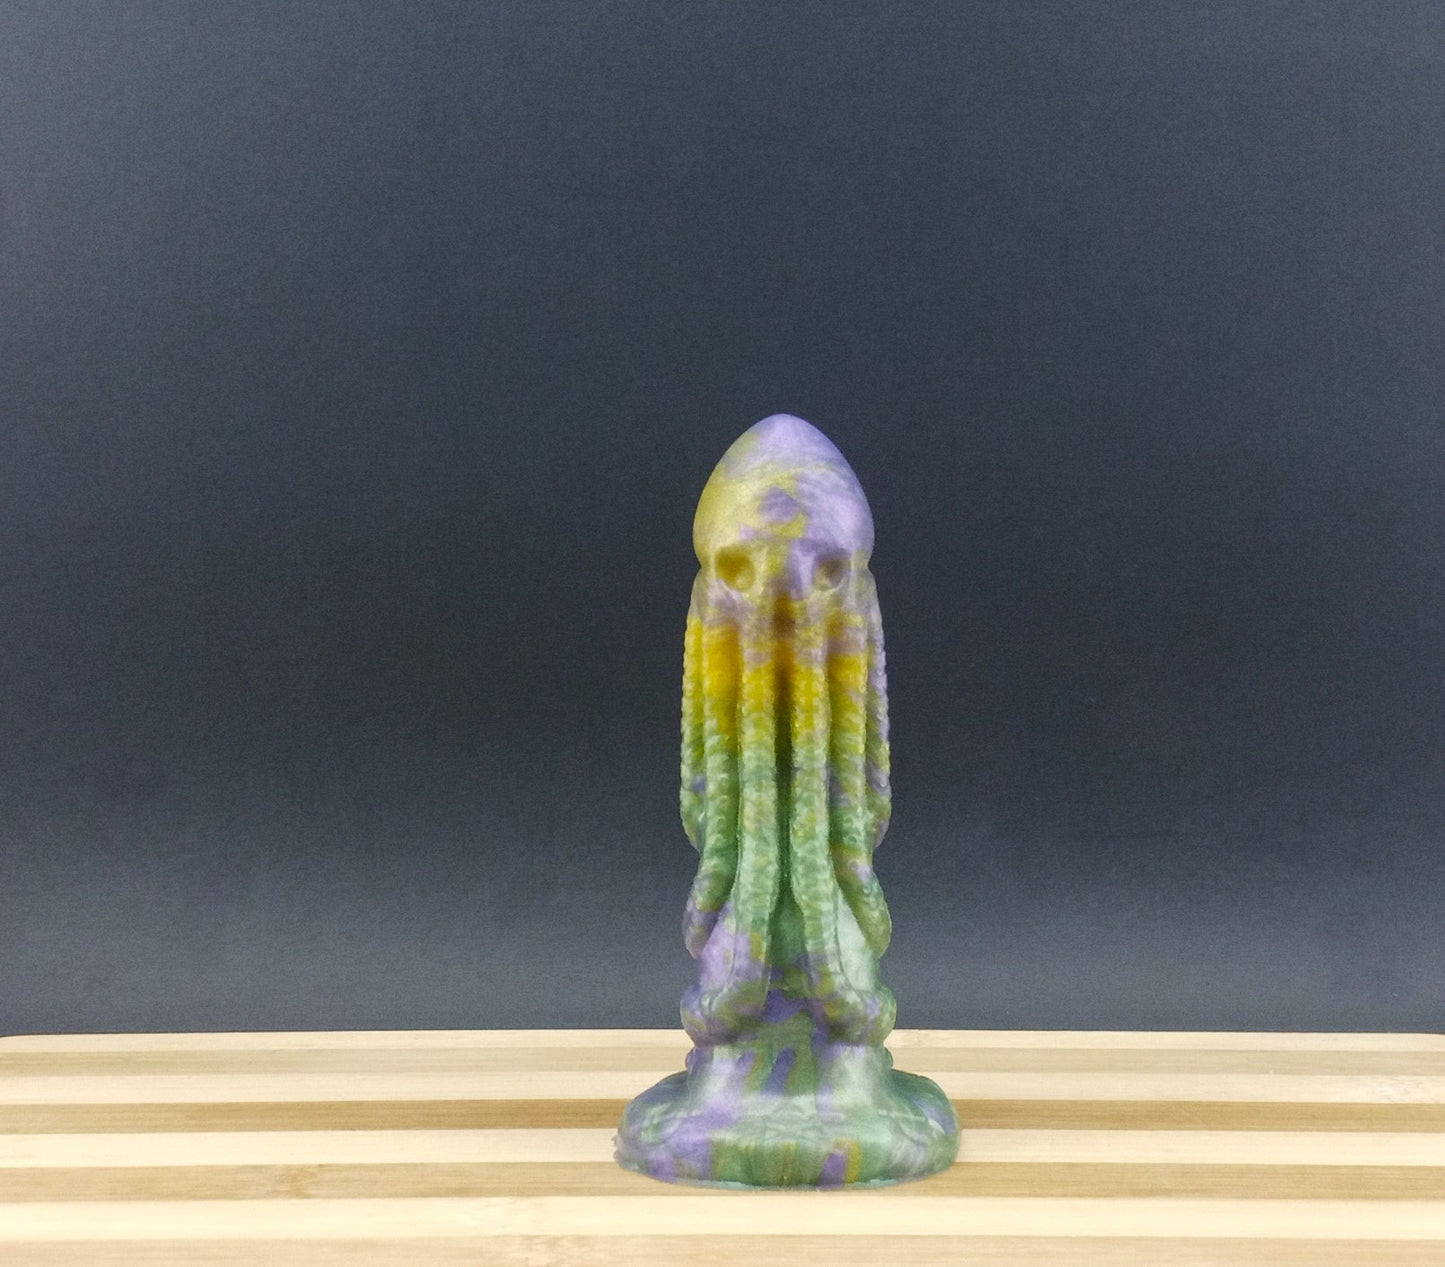 The Summoned One - Cthulhu Themed - Dragon Dildo - Mardi Gras Color - 00-30 FIrmness